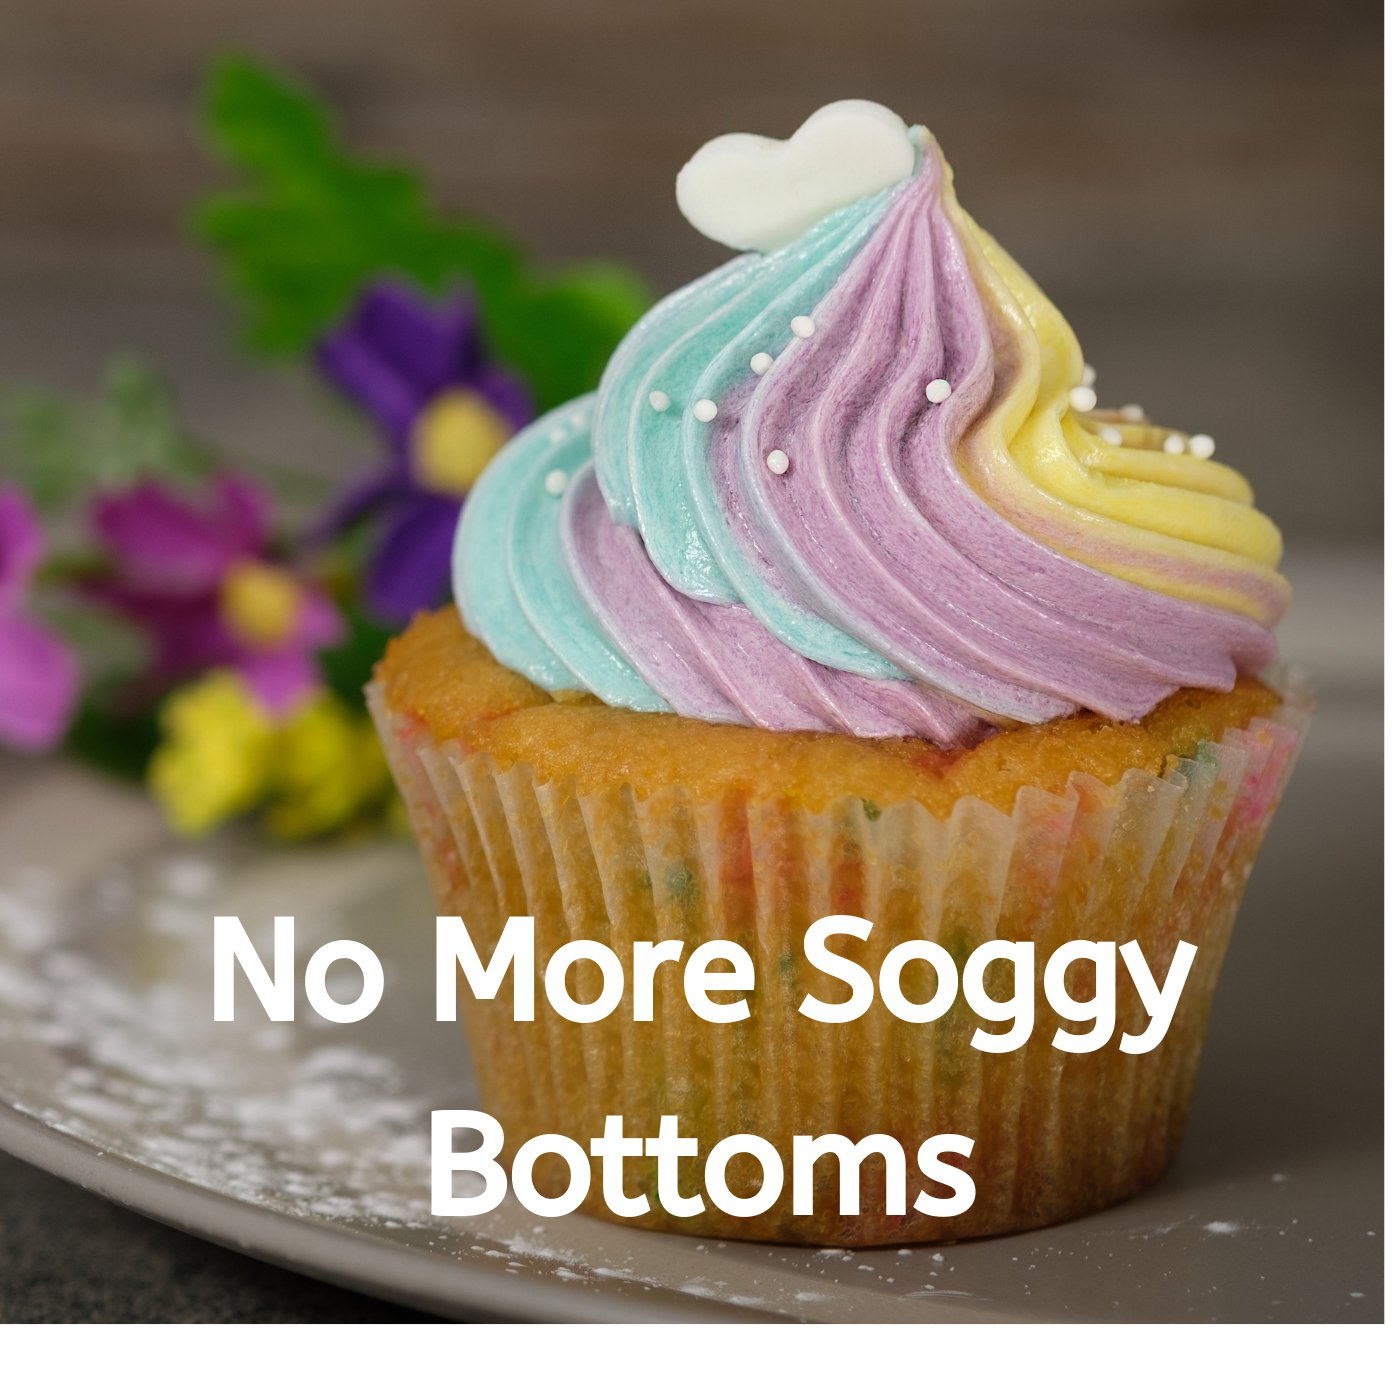 No More Soggy Bottoms